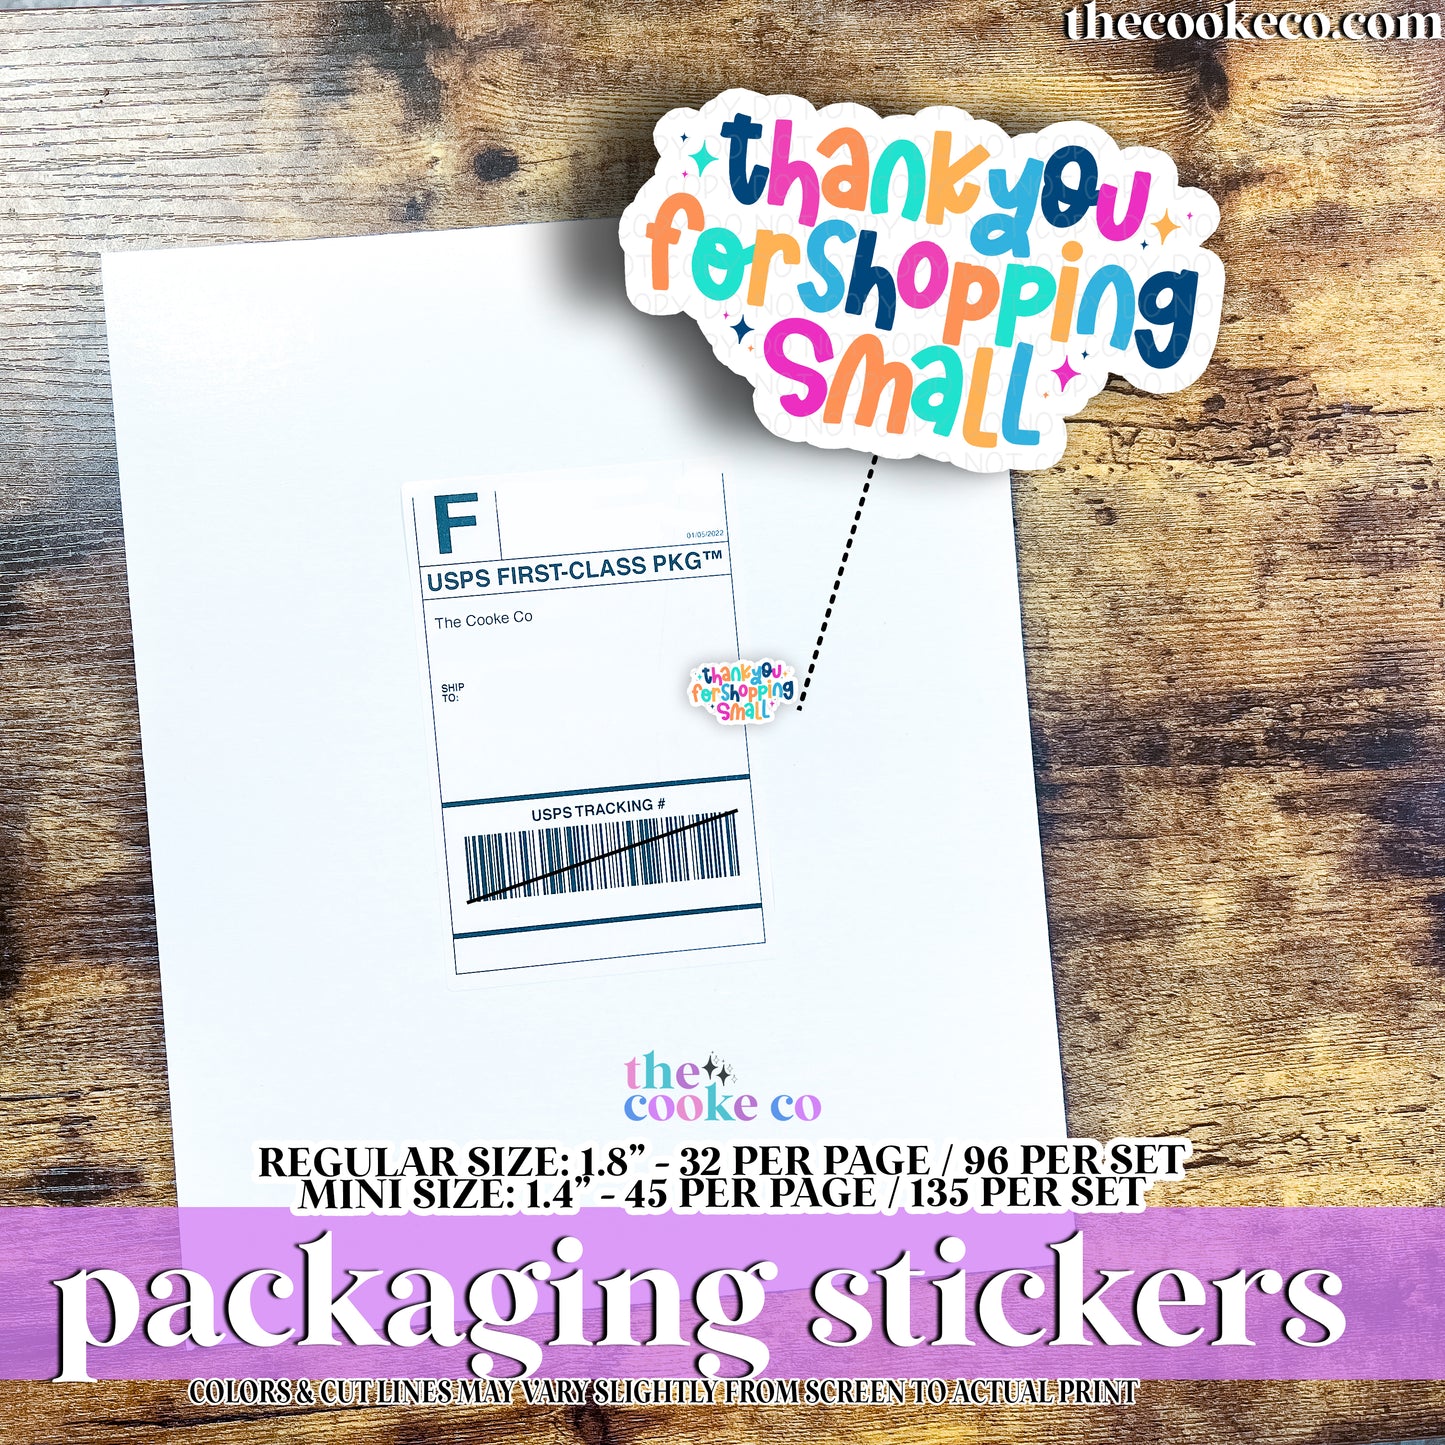 Packaging Stickers | #C0933 - THANK YOU FOR SHOPPING SMALL